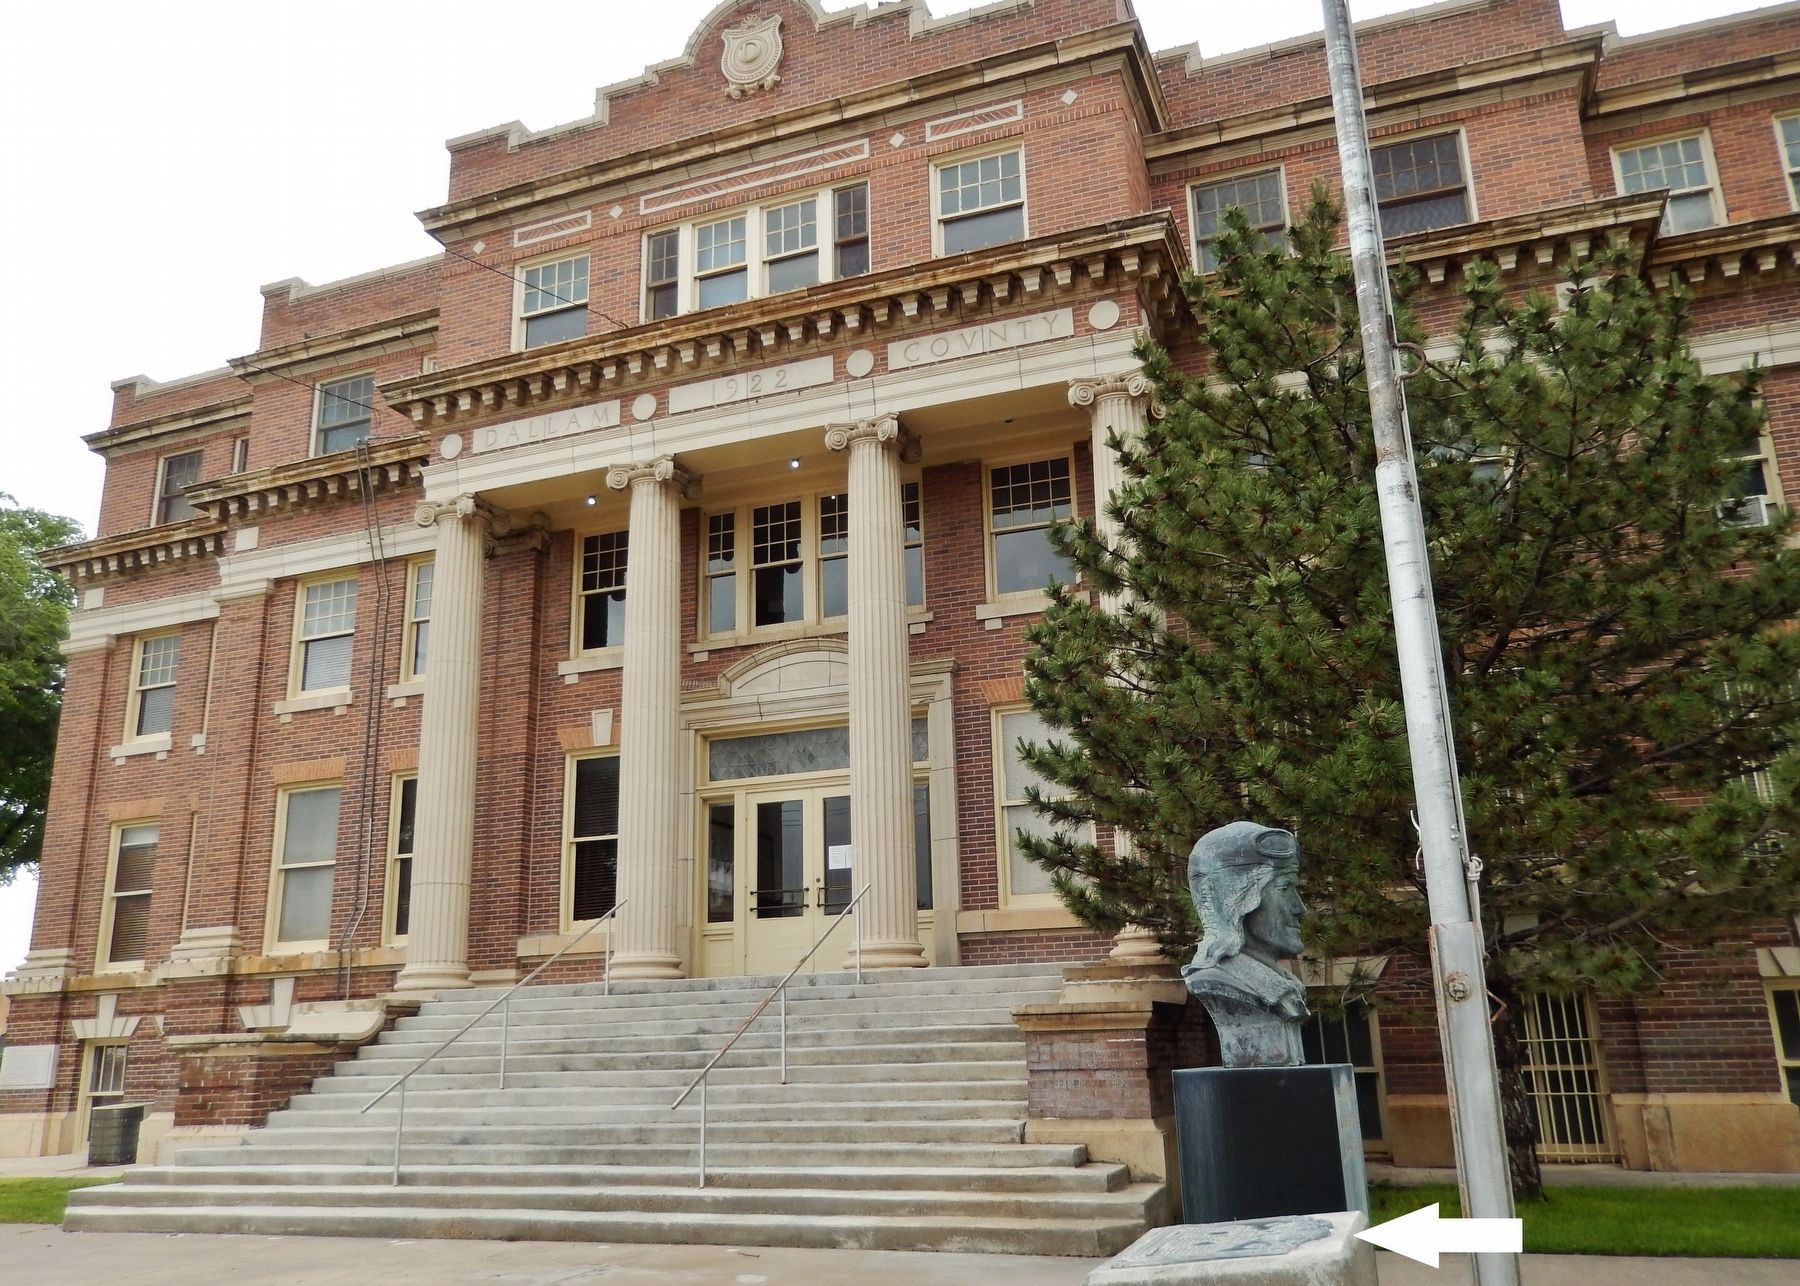 Dalhart High School Boys World War II Memorial (<i>Dallam County Courthouse in background</i>) image. Click for full size.